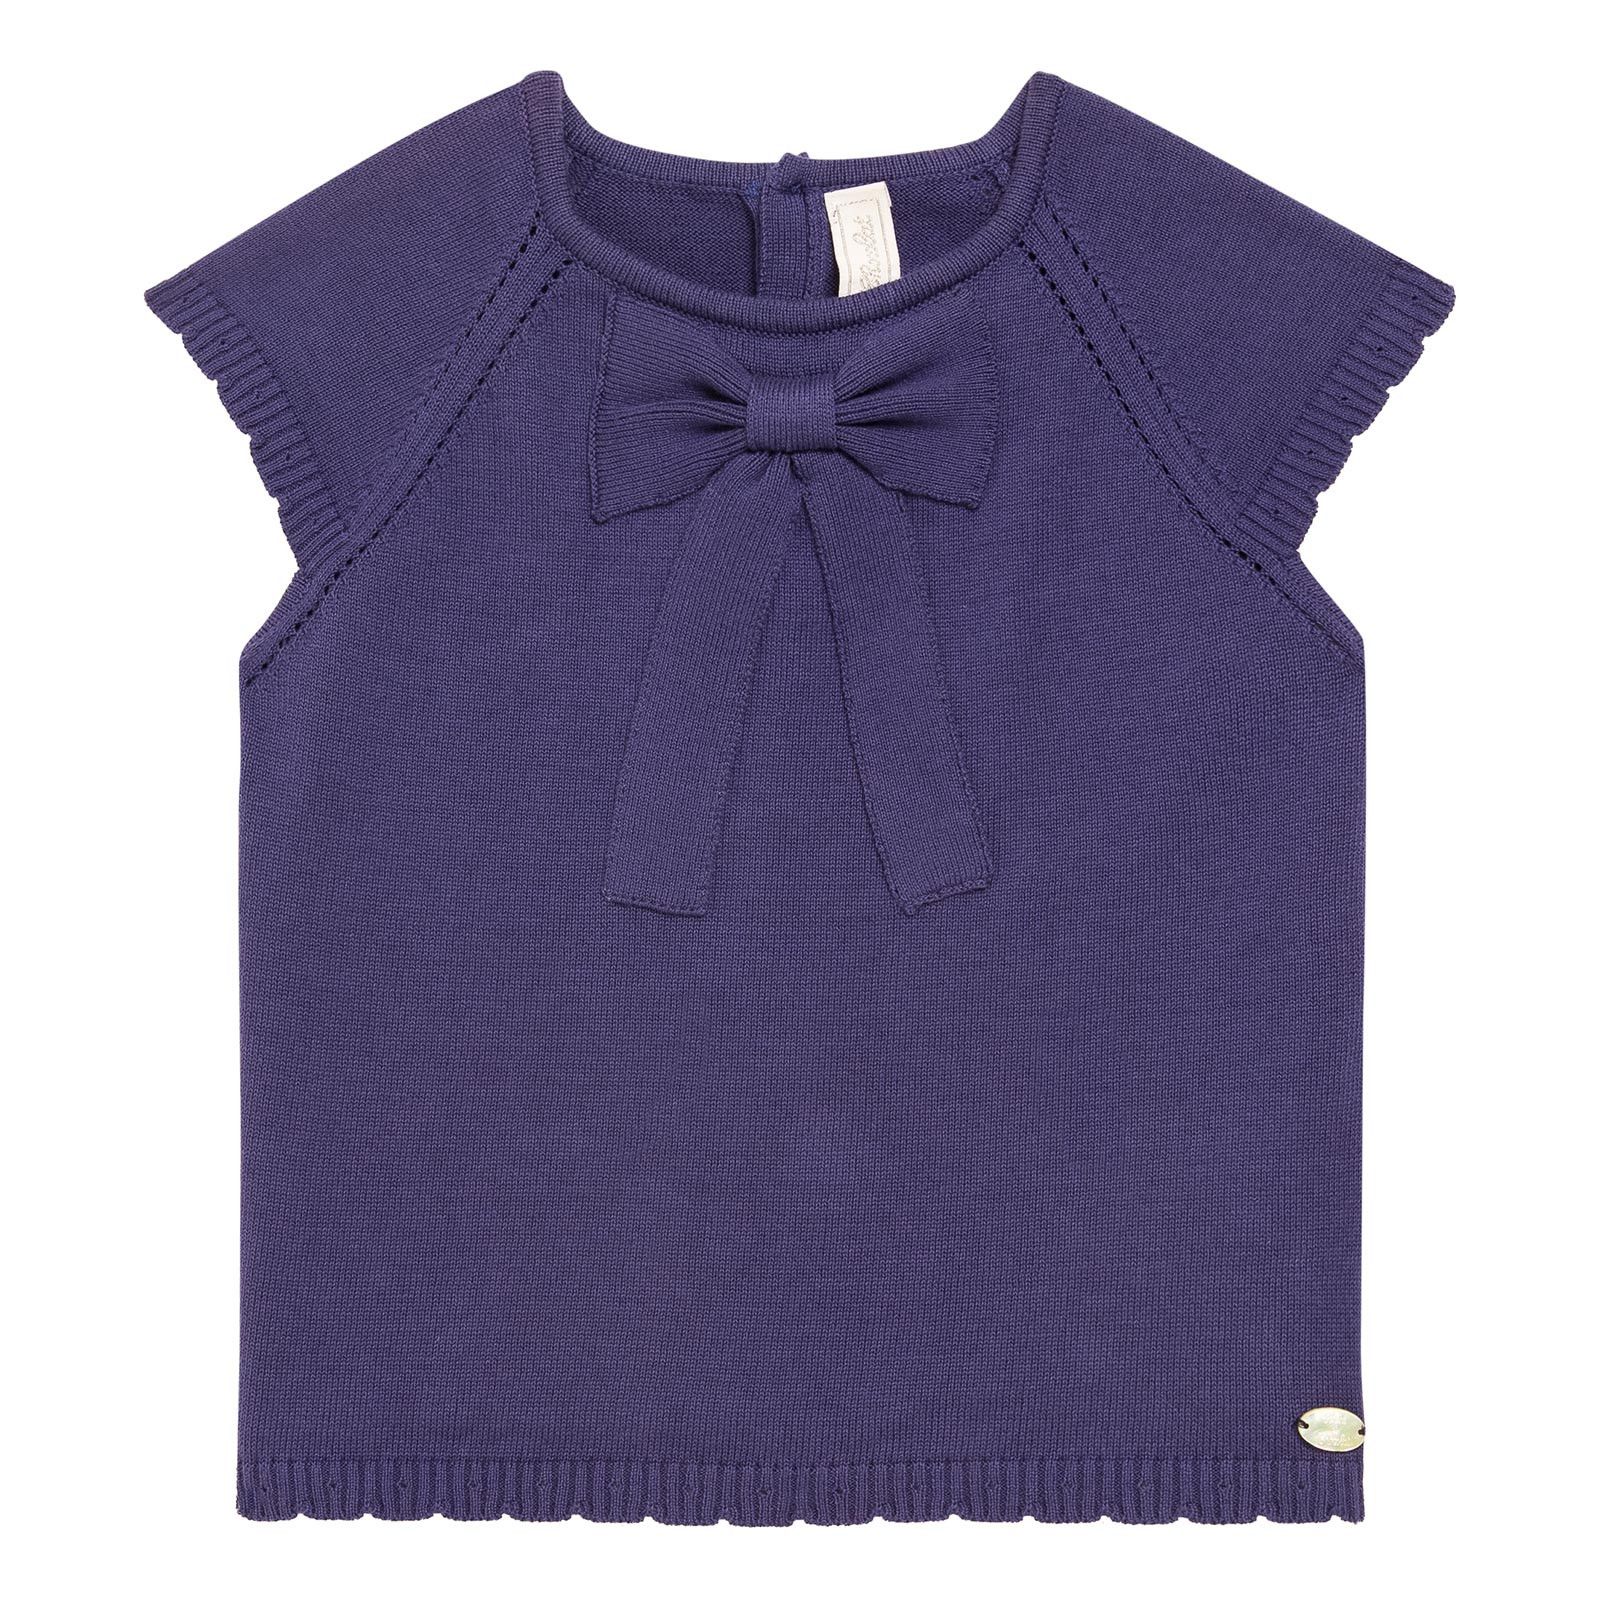 Girls Navy Blue Cotton Knitted Bow Trims Sweater - CÉMAROSE | Children's Fashion Store